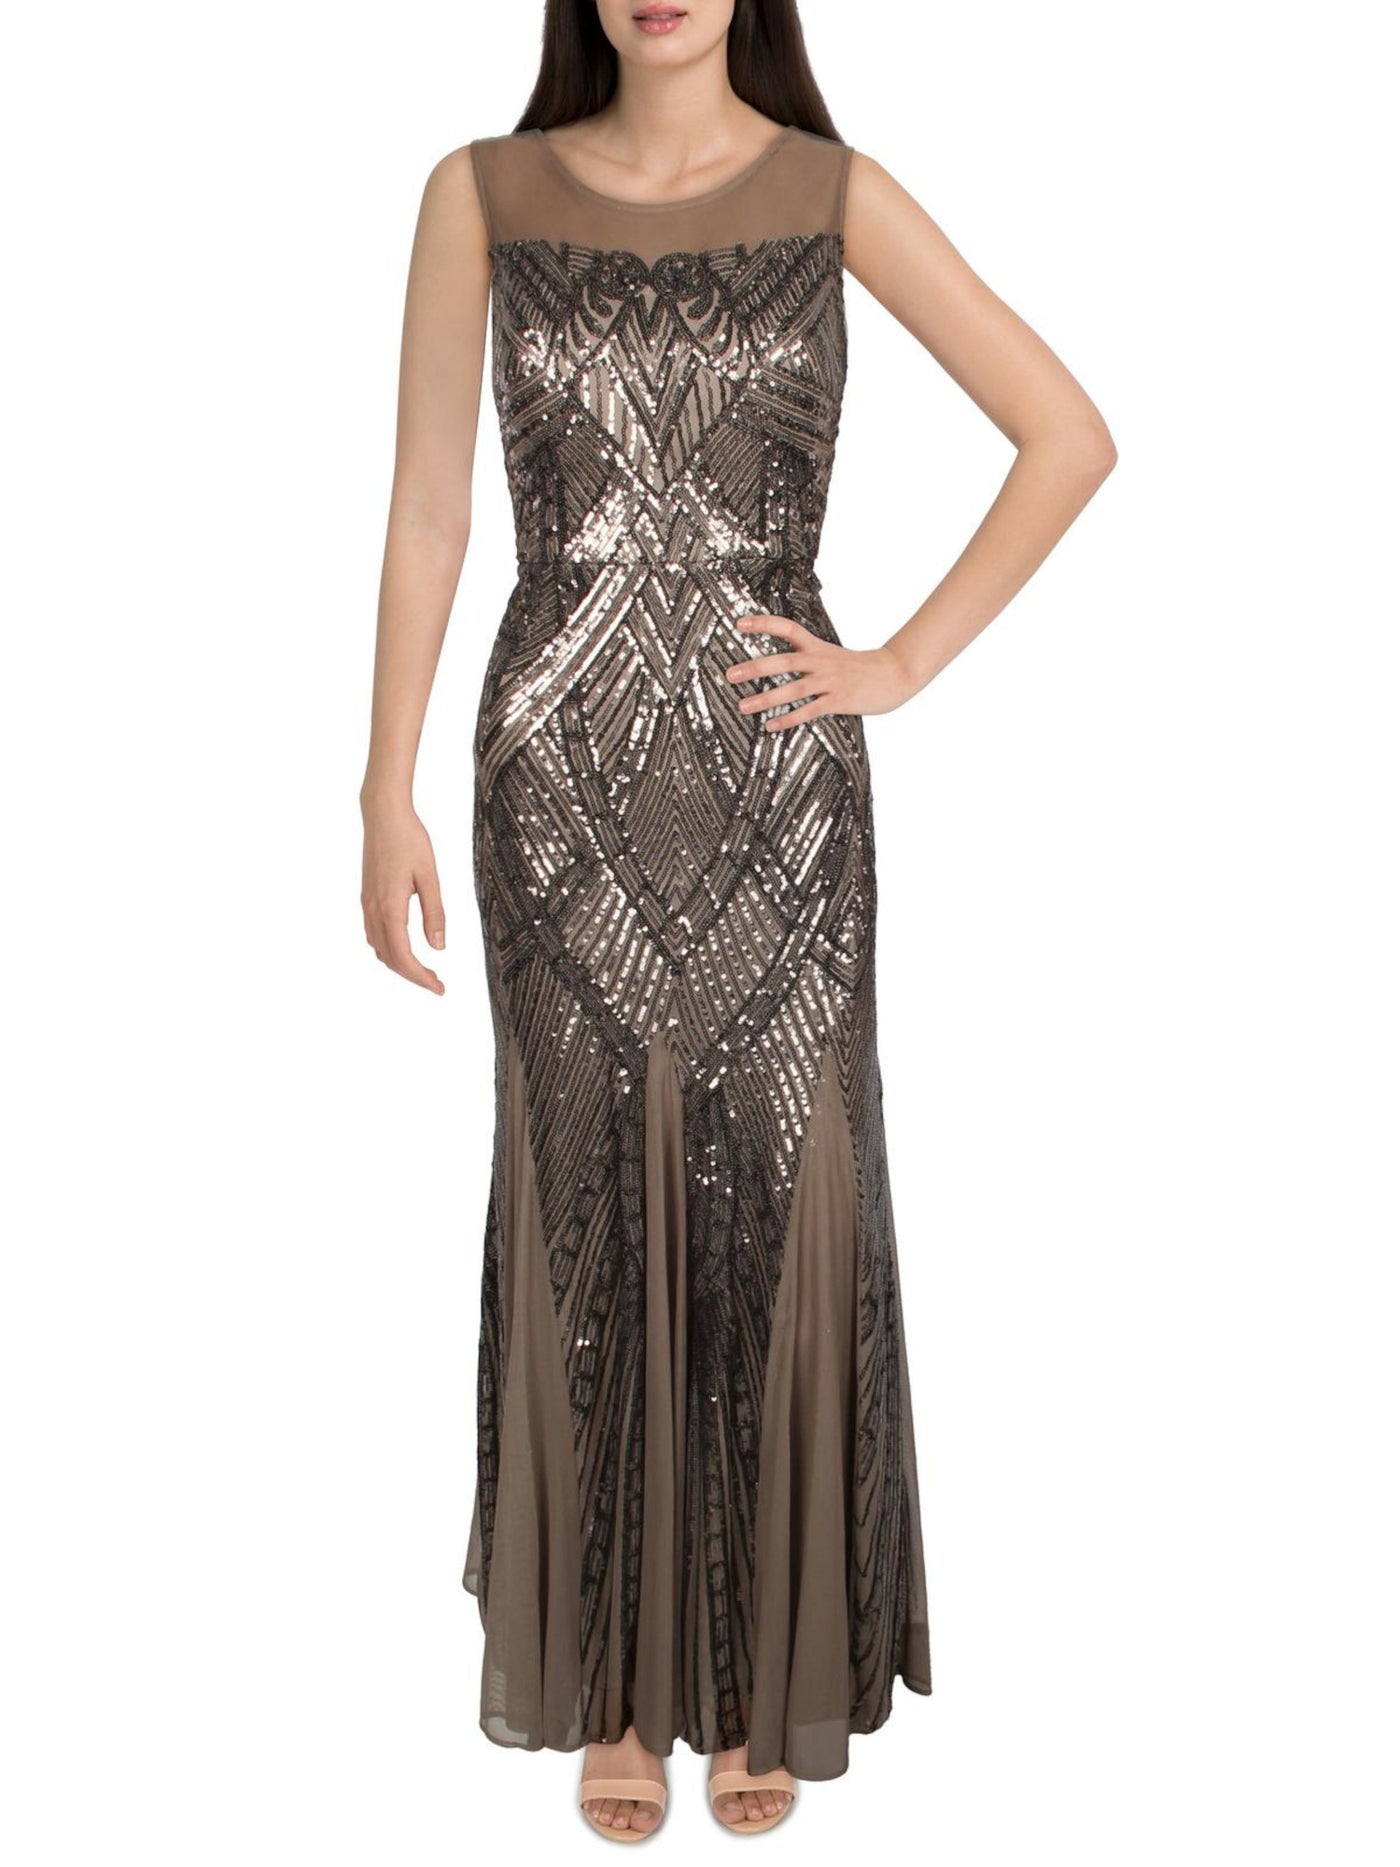 NIGHTWAY Womens Brown Stretch Sequined Zippered Lined Sleeveless Illusion Neckline Full-Length Formal Gown Dress 10